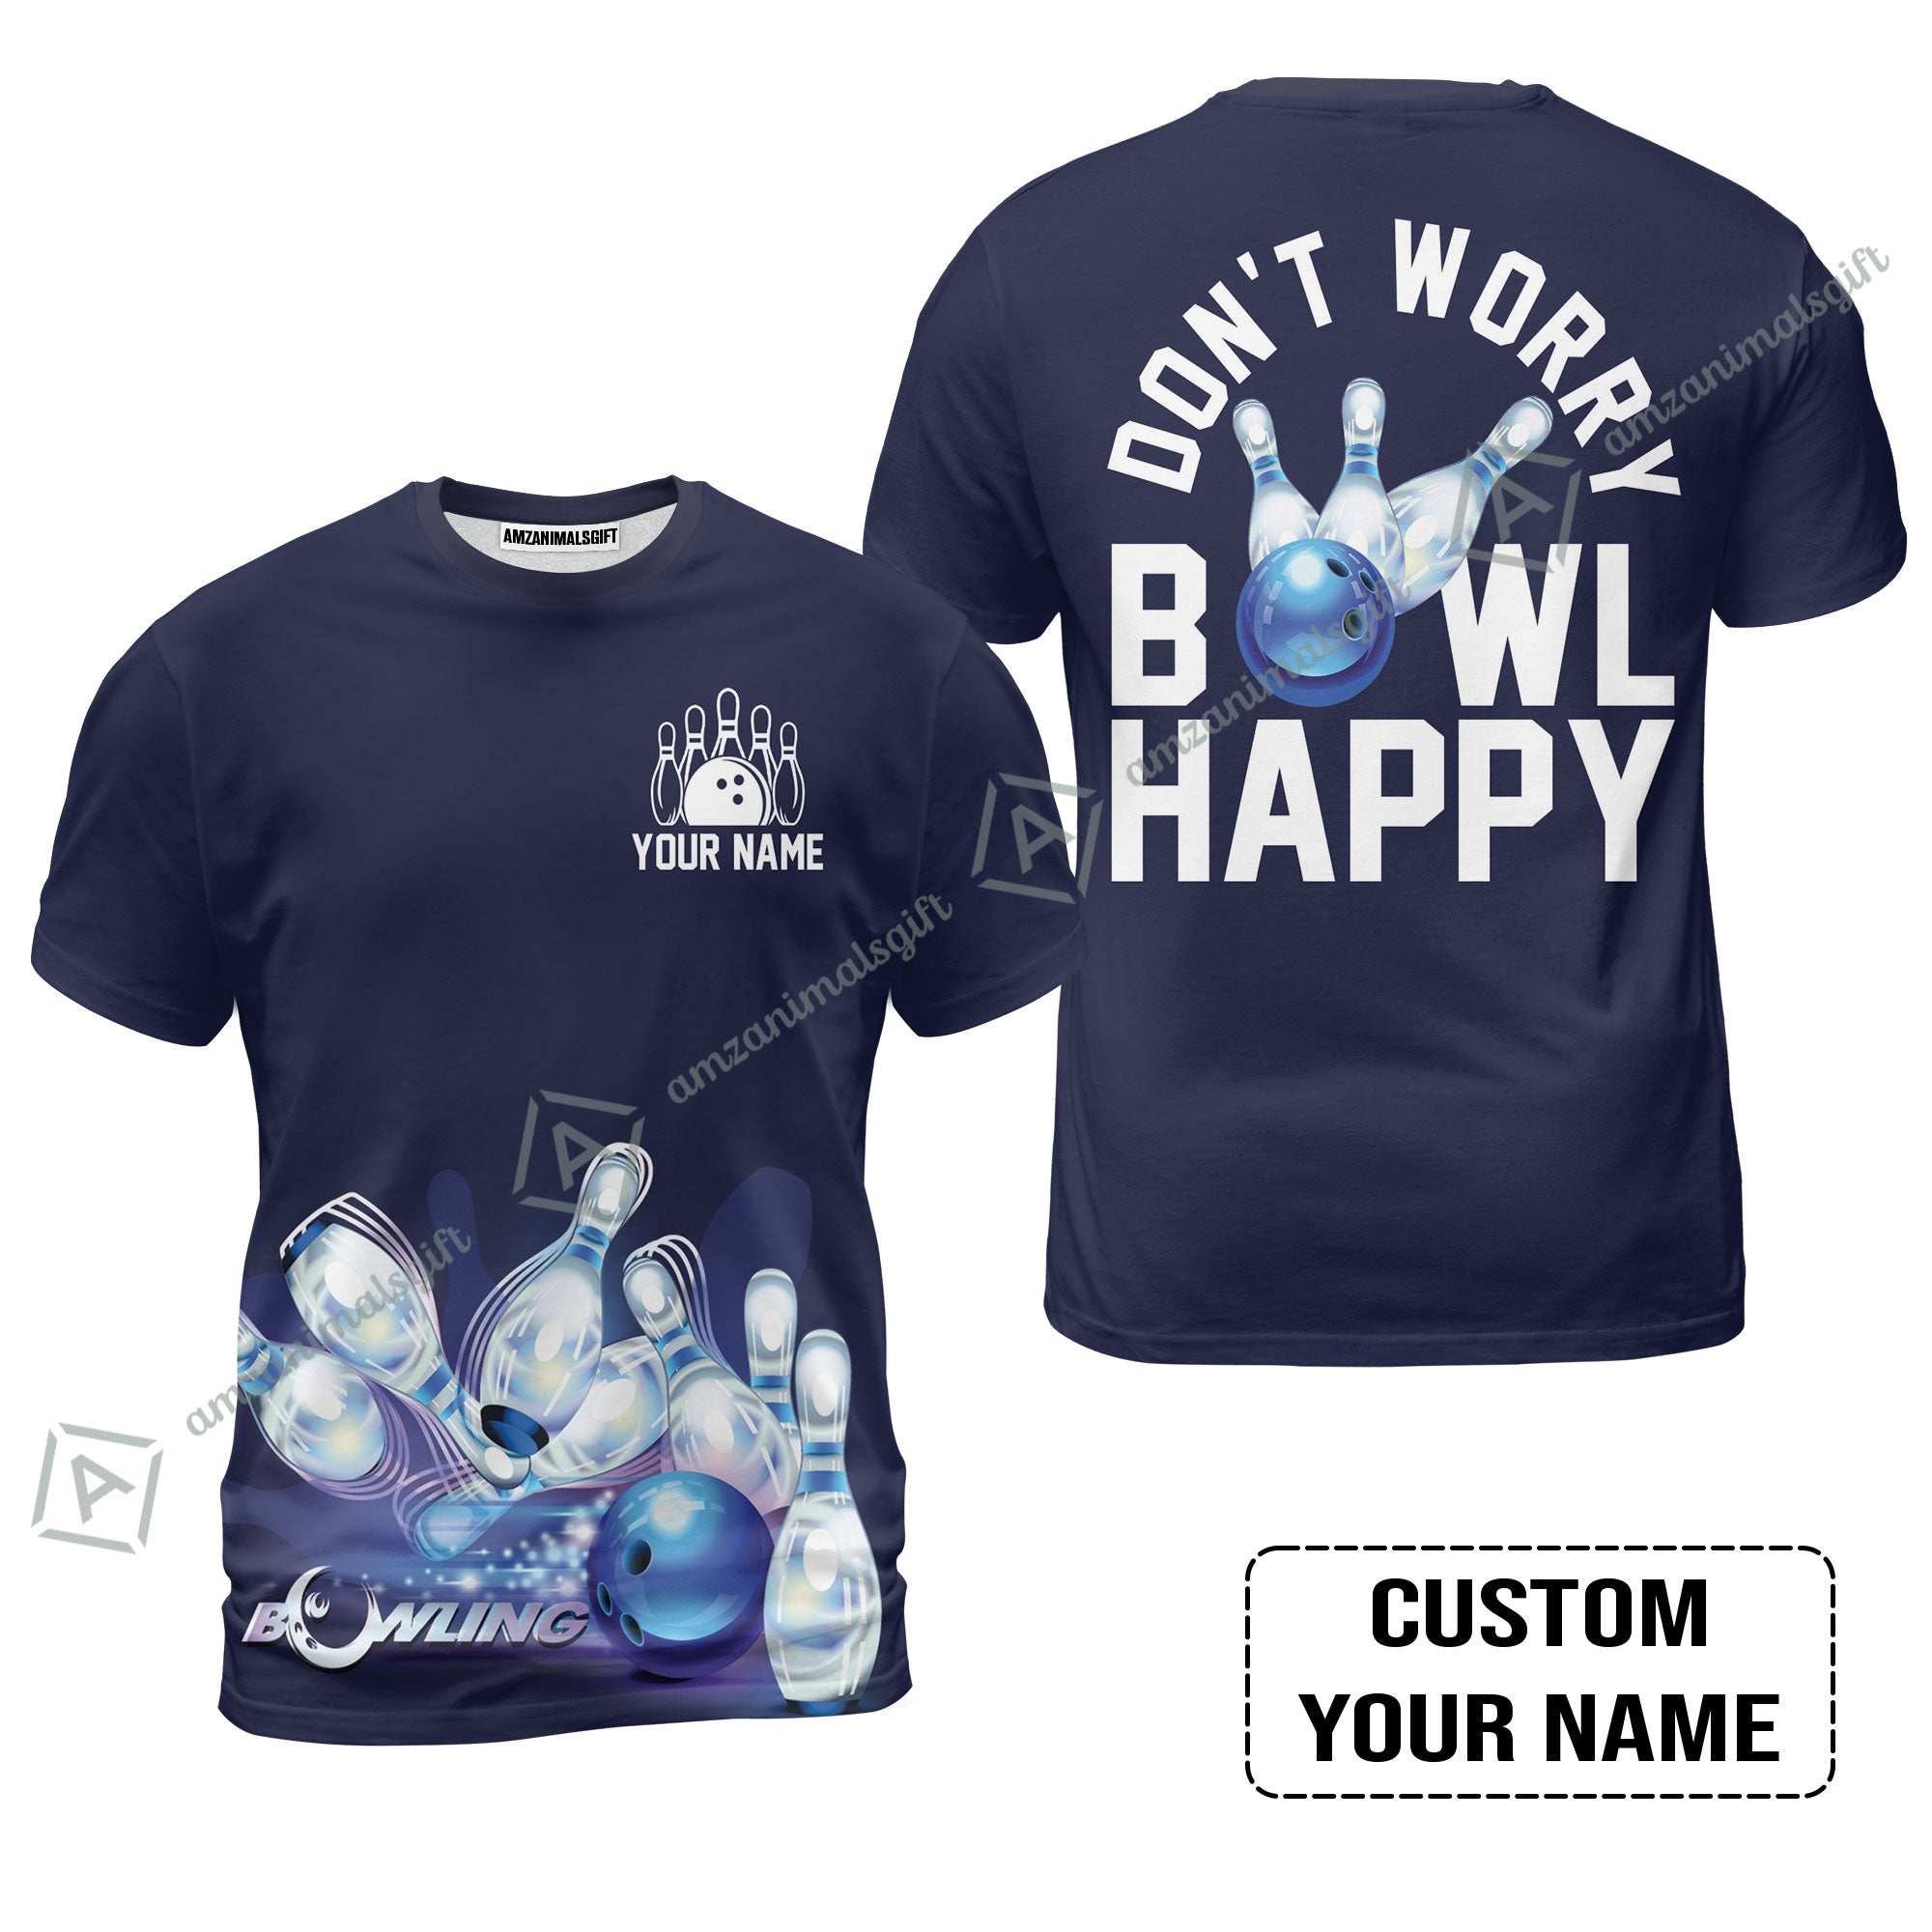 Bowling Custom Name T-Shirt - Don't Worry Bowl Happy Personalized T-Shirt - Gift For Friend, Family, Bowling Lovers